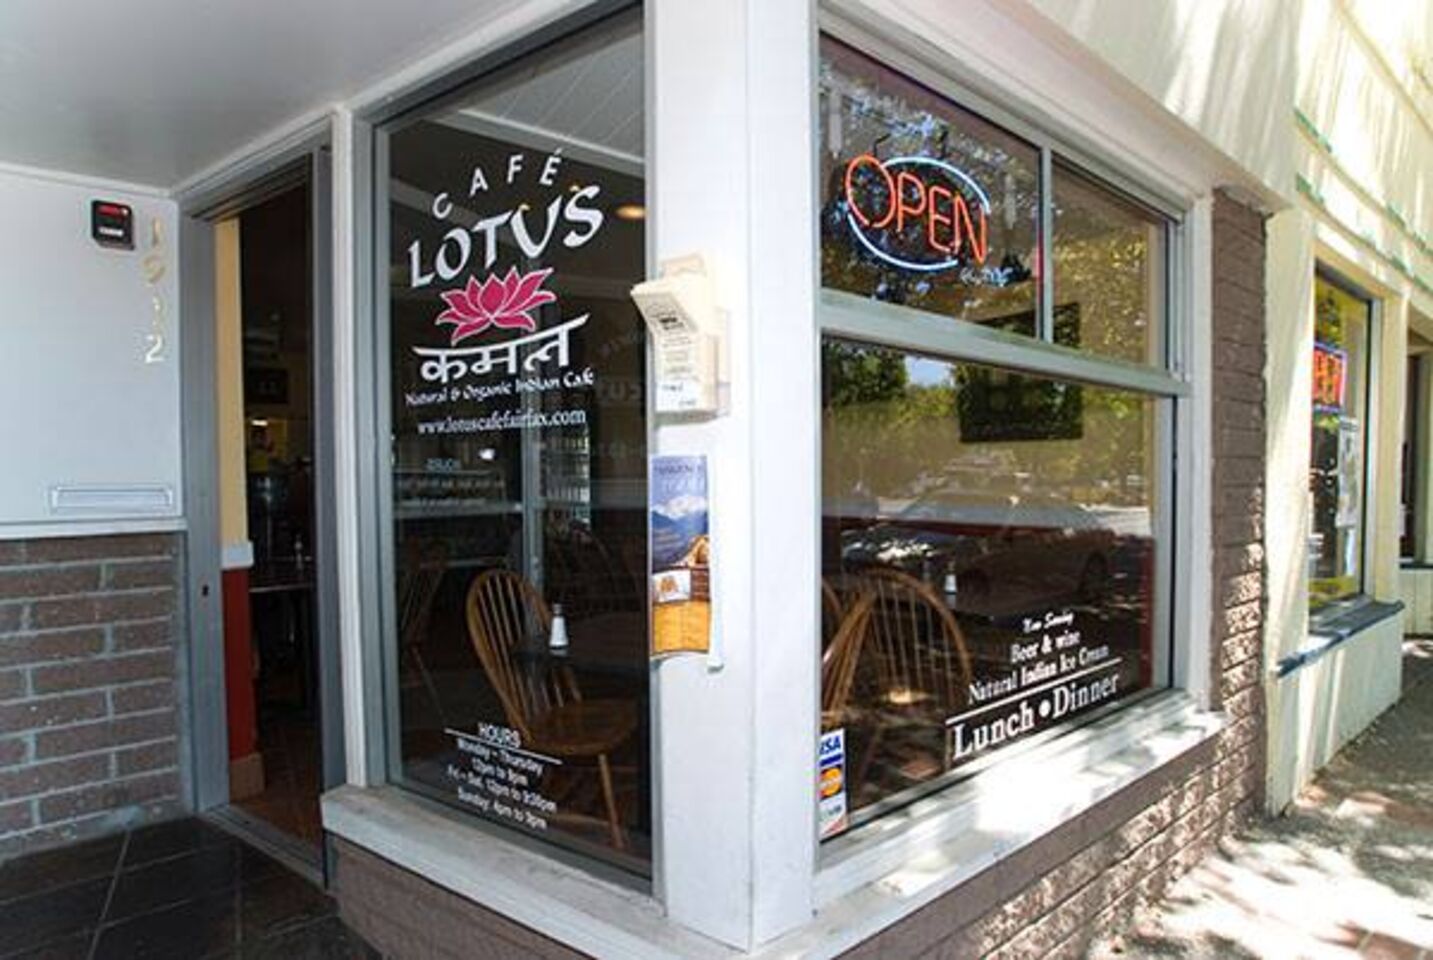 A photo of Cafe Lotus